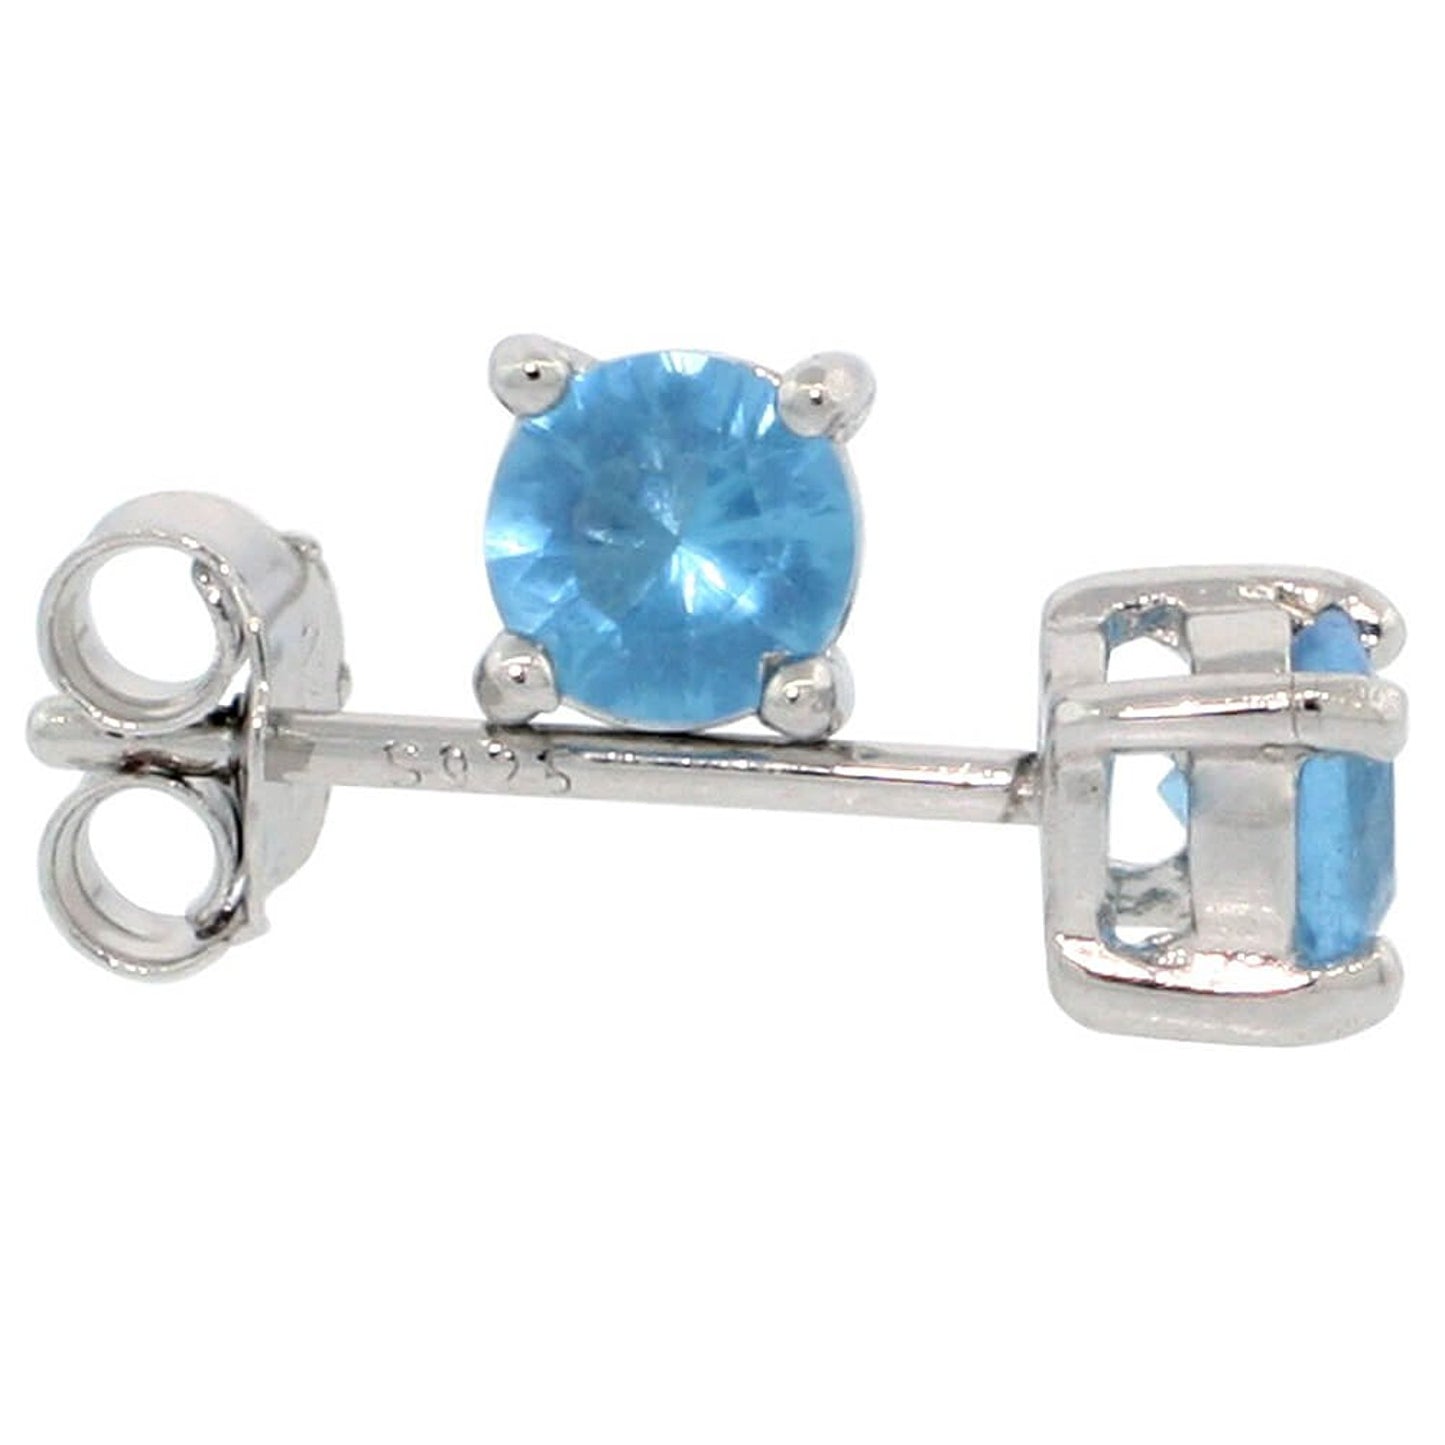 .925 Sterling Silver Aqua 4mm - 7mm Round Cut CZ Stud Rhodium Plated Earrings - Made in Italy (SKU: SS-ER1010)